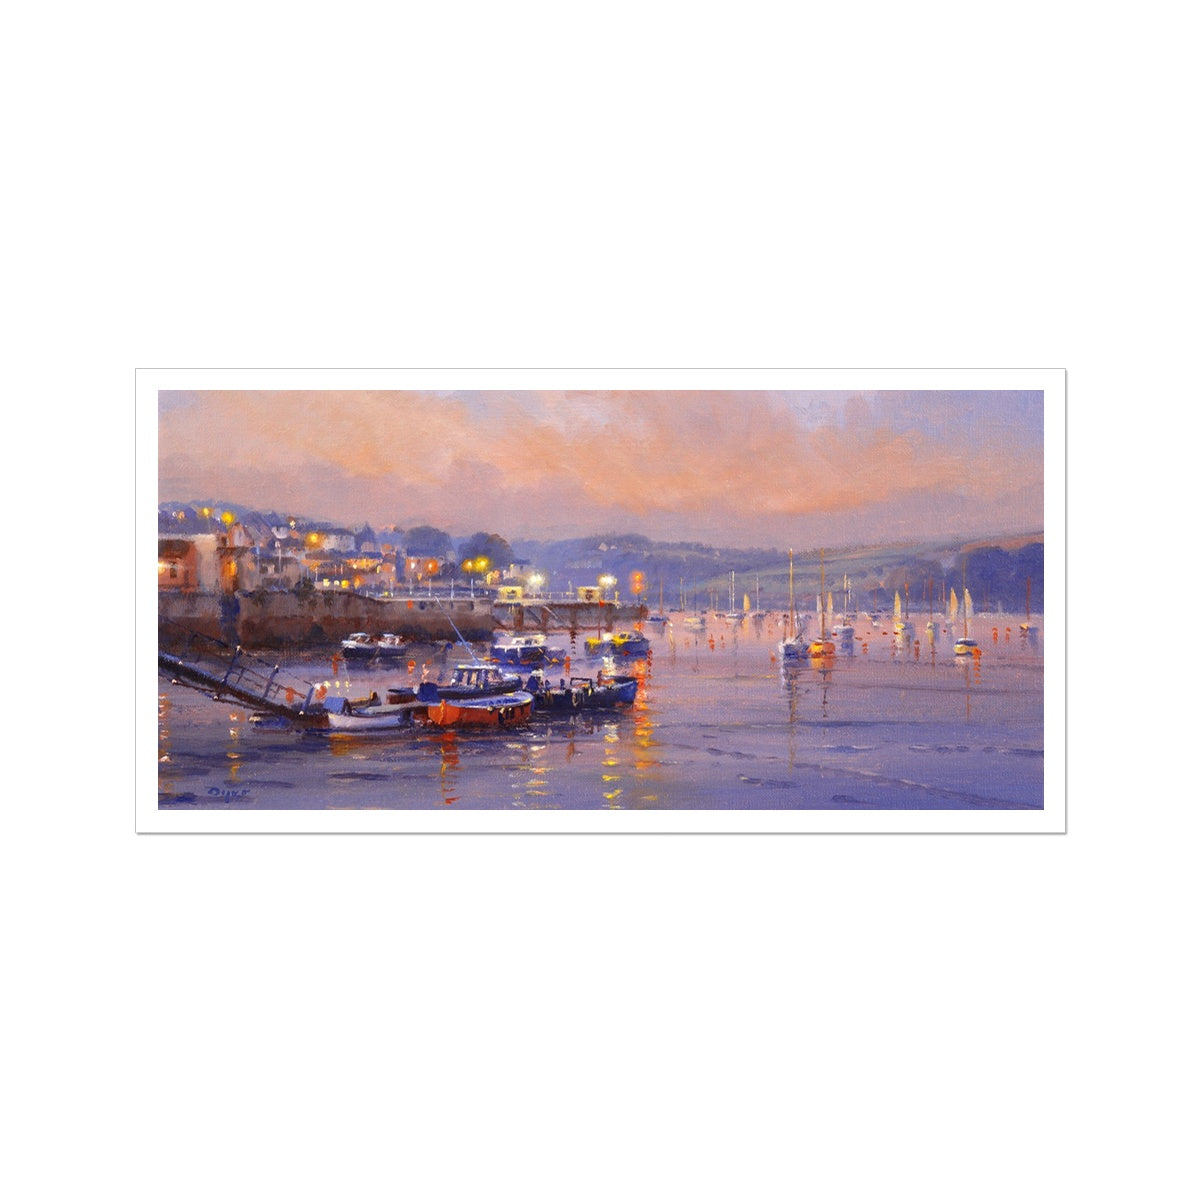 Ted Dyer Fine Art Print. Open Edition Cornish Art Print. 'Summer Evening, Falmouth Harbour'. Cornwall Art Gallery